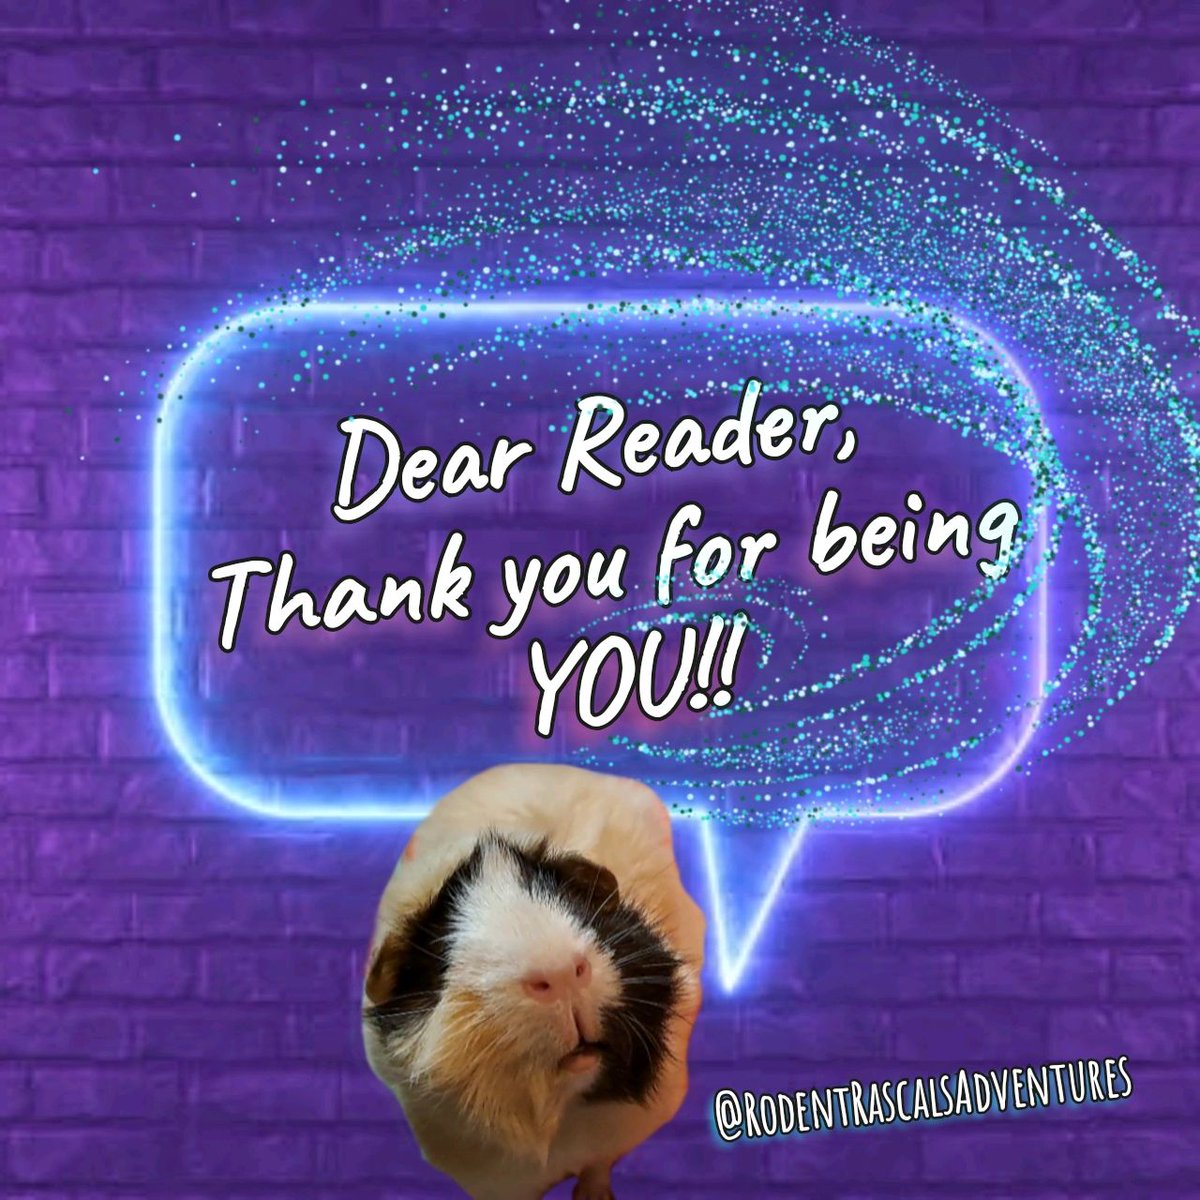 🐽💭 GOOD MORNING!!! In case YOU missed our last memo, we thought we'd tell YOU again...
❤️🐹🐽🐀💻⬇️
#RodentRascalsAdventures 

#guineapig #guineapigs #SundayMorning #foryou #FYP #foryoupage #SundayThoughts #SundayVibes #selflove #AllLivesMatter #YouAreEnough #YouAreImportant